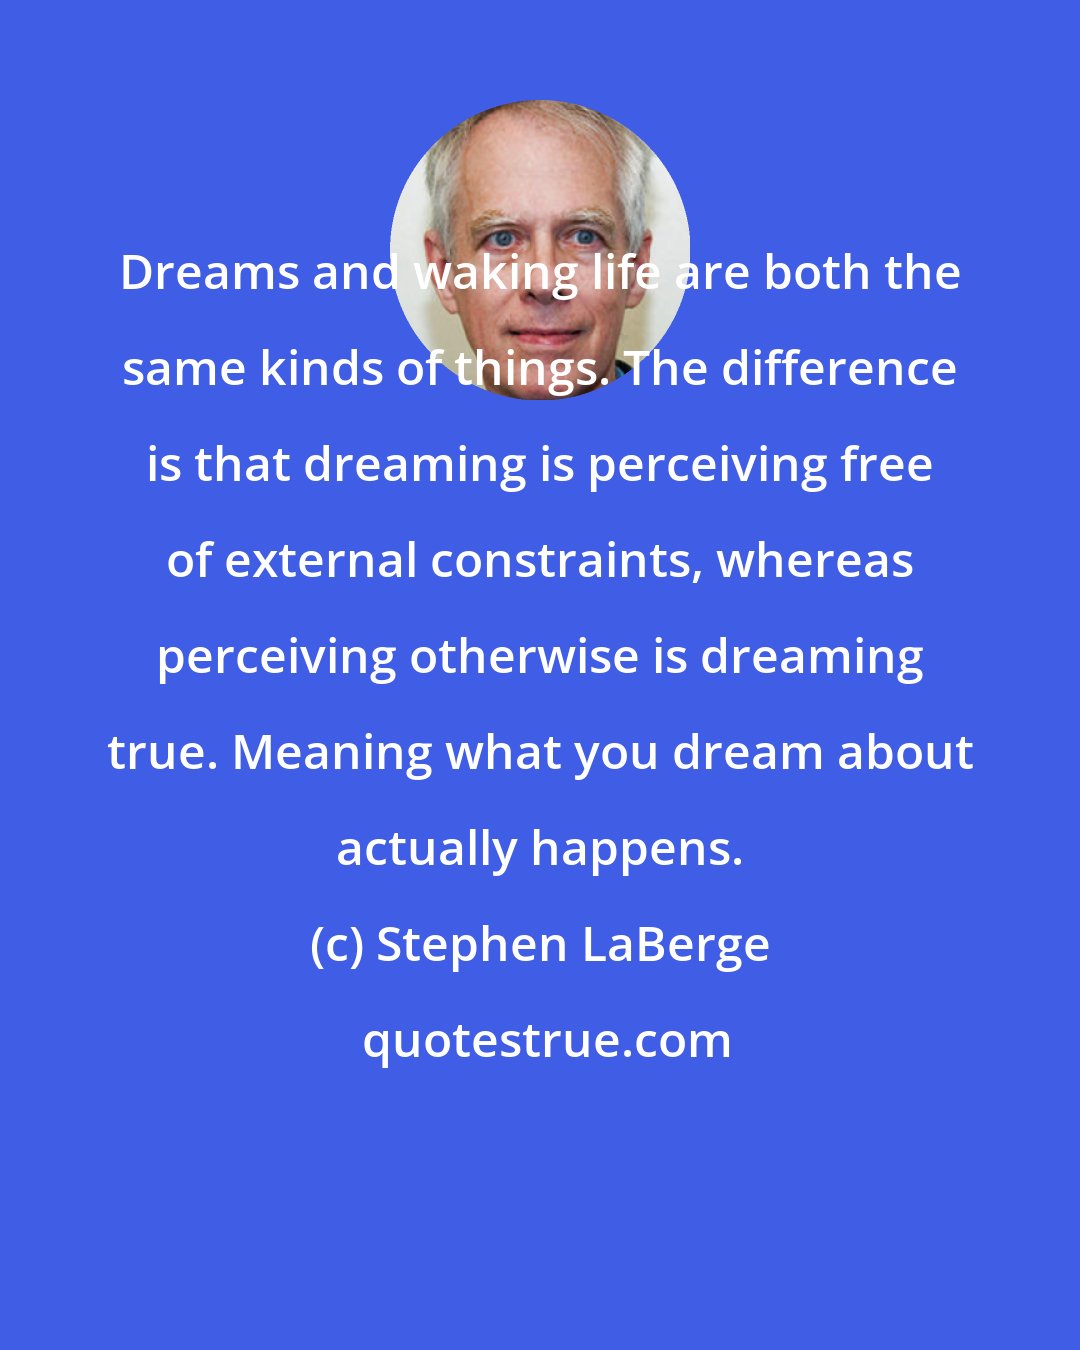 Stephen LaBerge: Dreams and waking life are both the same kinds of things. The difference is that dreaming is perceiving free of external constraints, whereas perceiving otherwise is dreaming true. Meaning what you dream about actually happens.